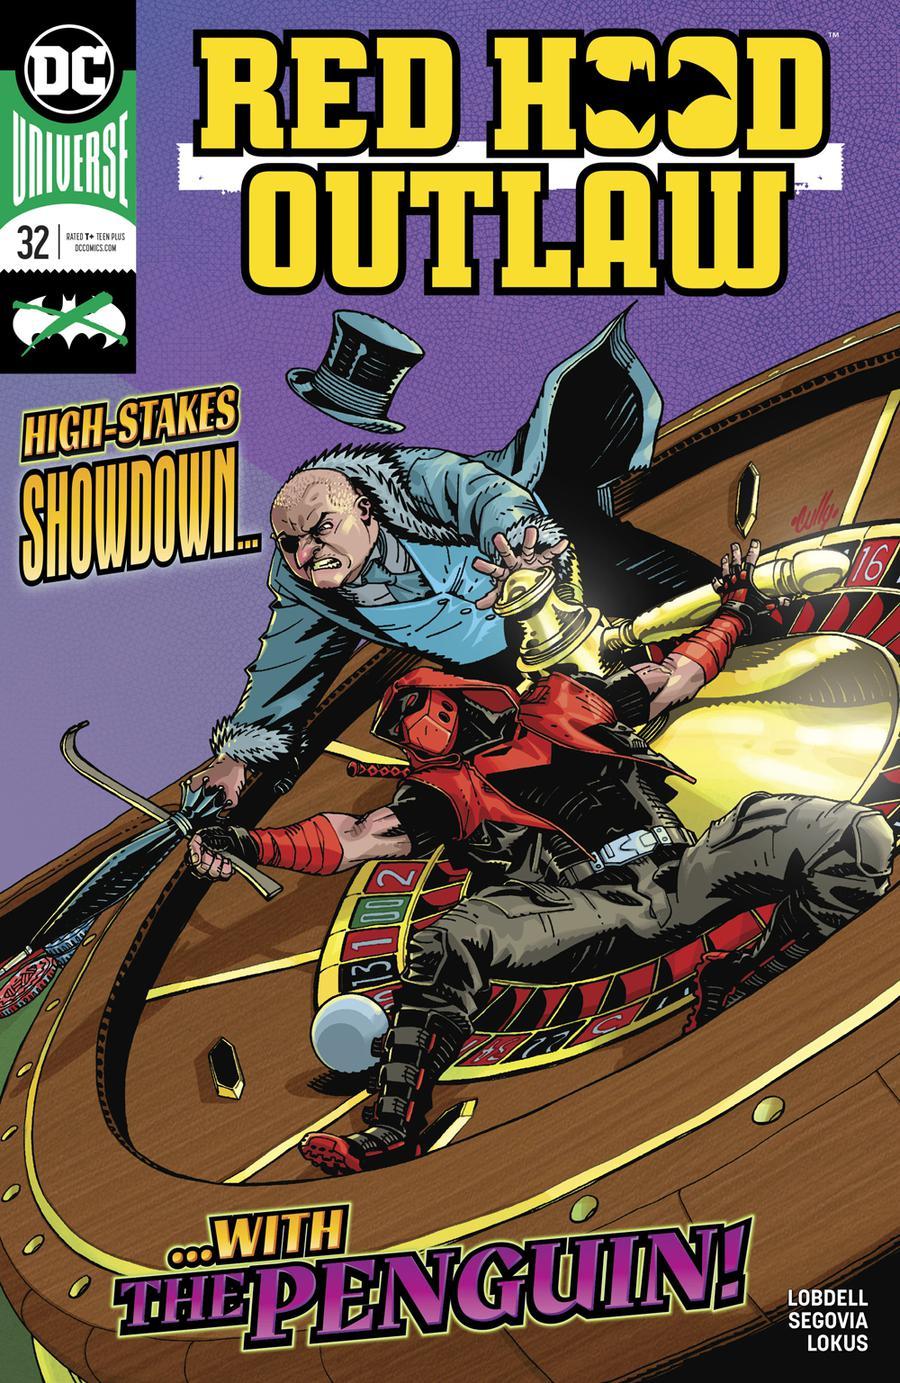 Red Hood Outlaw Vol. 1 #32